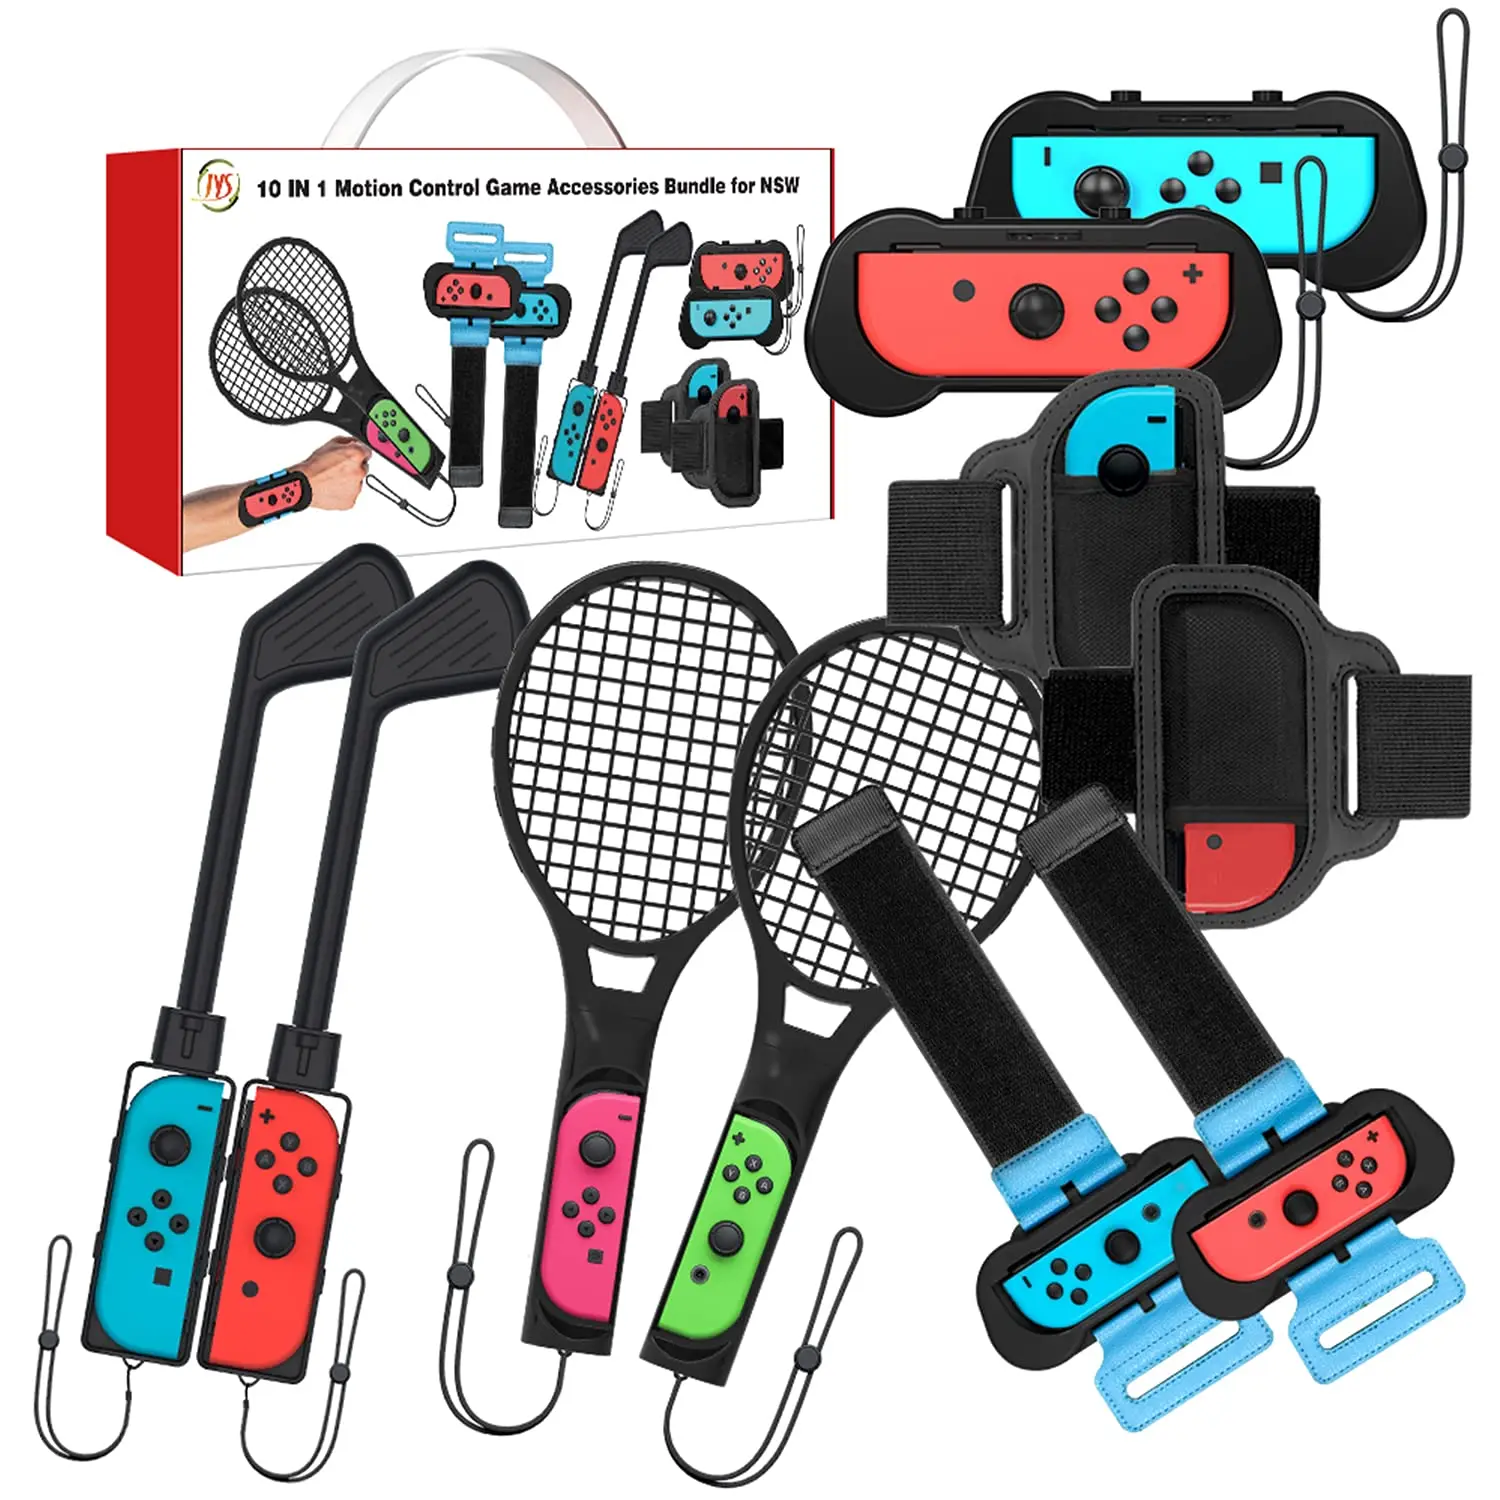 2022 Switch Sports 10 in 1 Accessories Kit Golf Wrist Dance Bands & Leg  Strap Grip Case for Nintendo Switch & OLED Joycon Grip